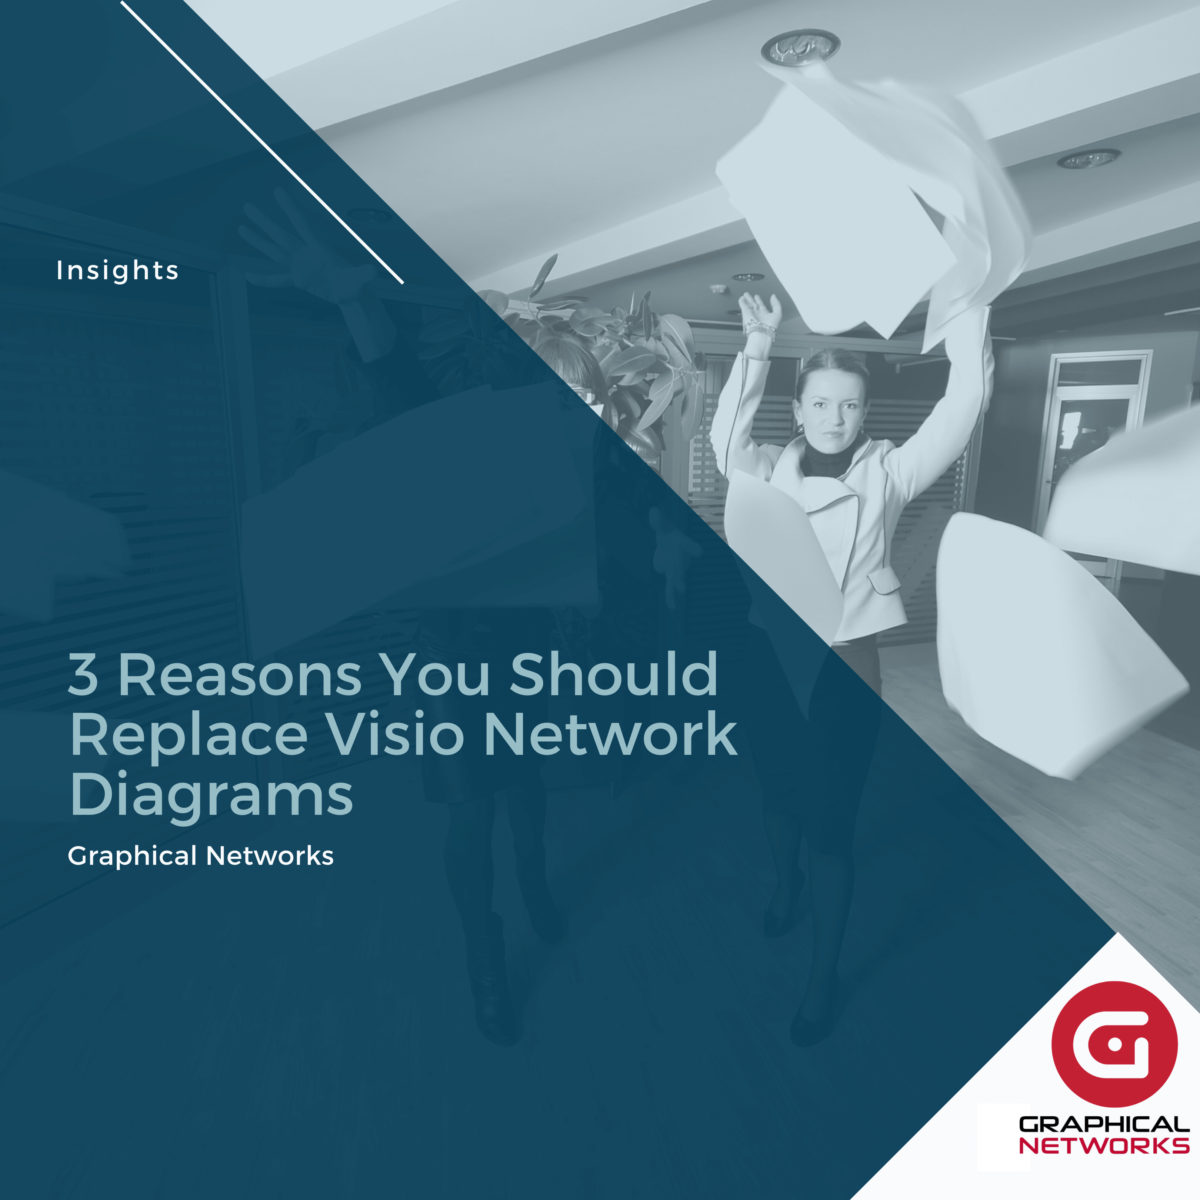 3 Reasons You Should Replace Visio Network Diagrams